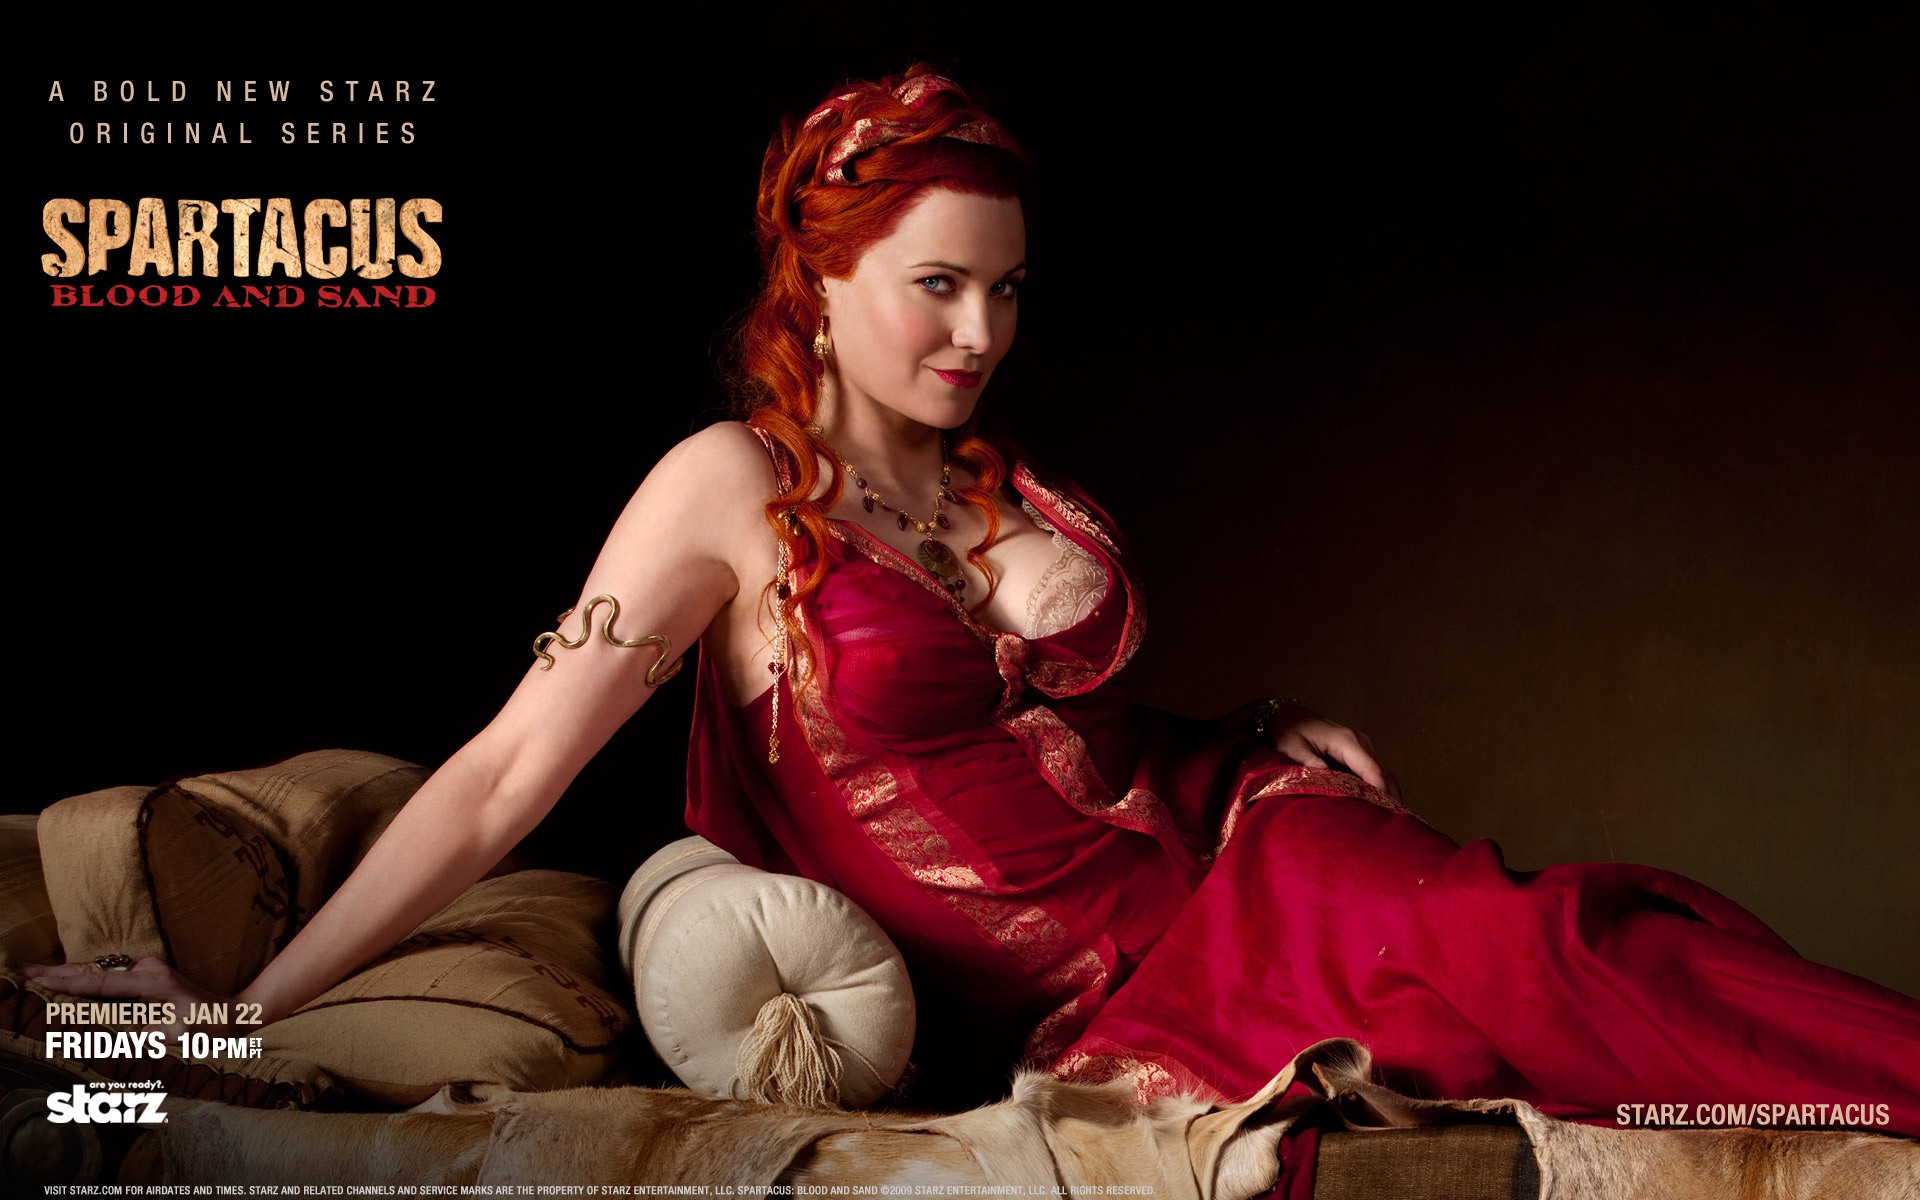 Spartacus: Blood and Sand HD Wallpaper #6 - 1920x1200